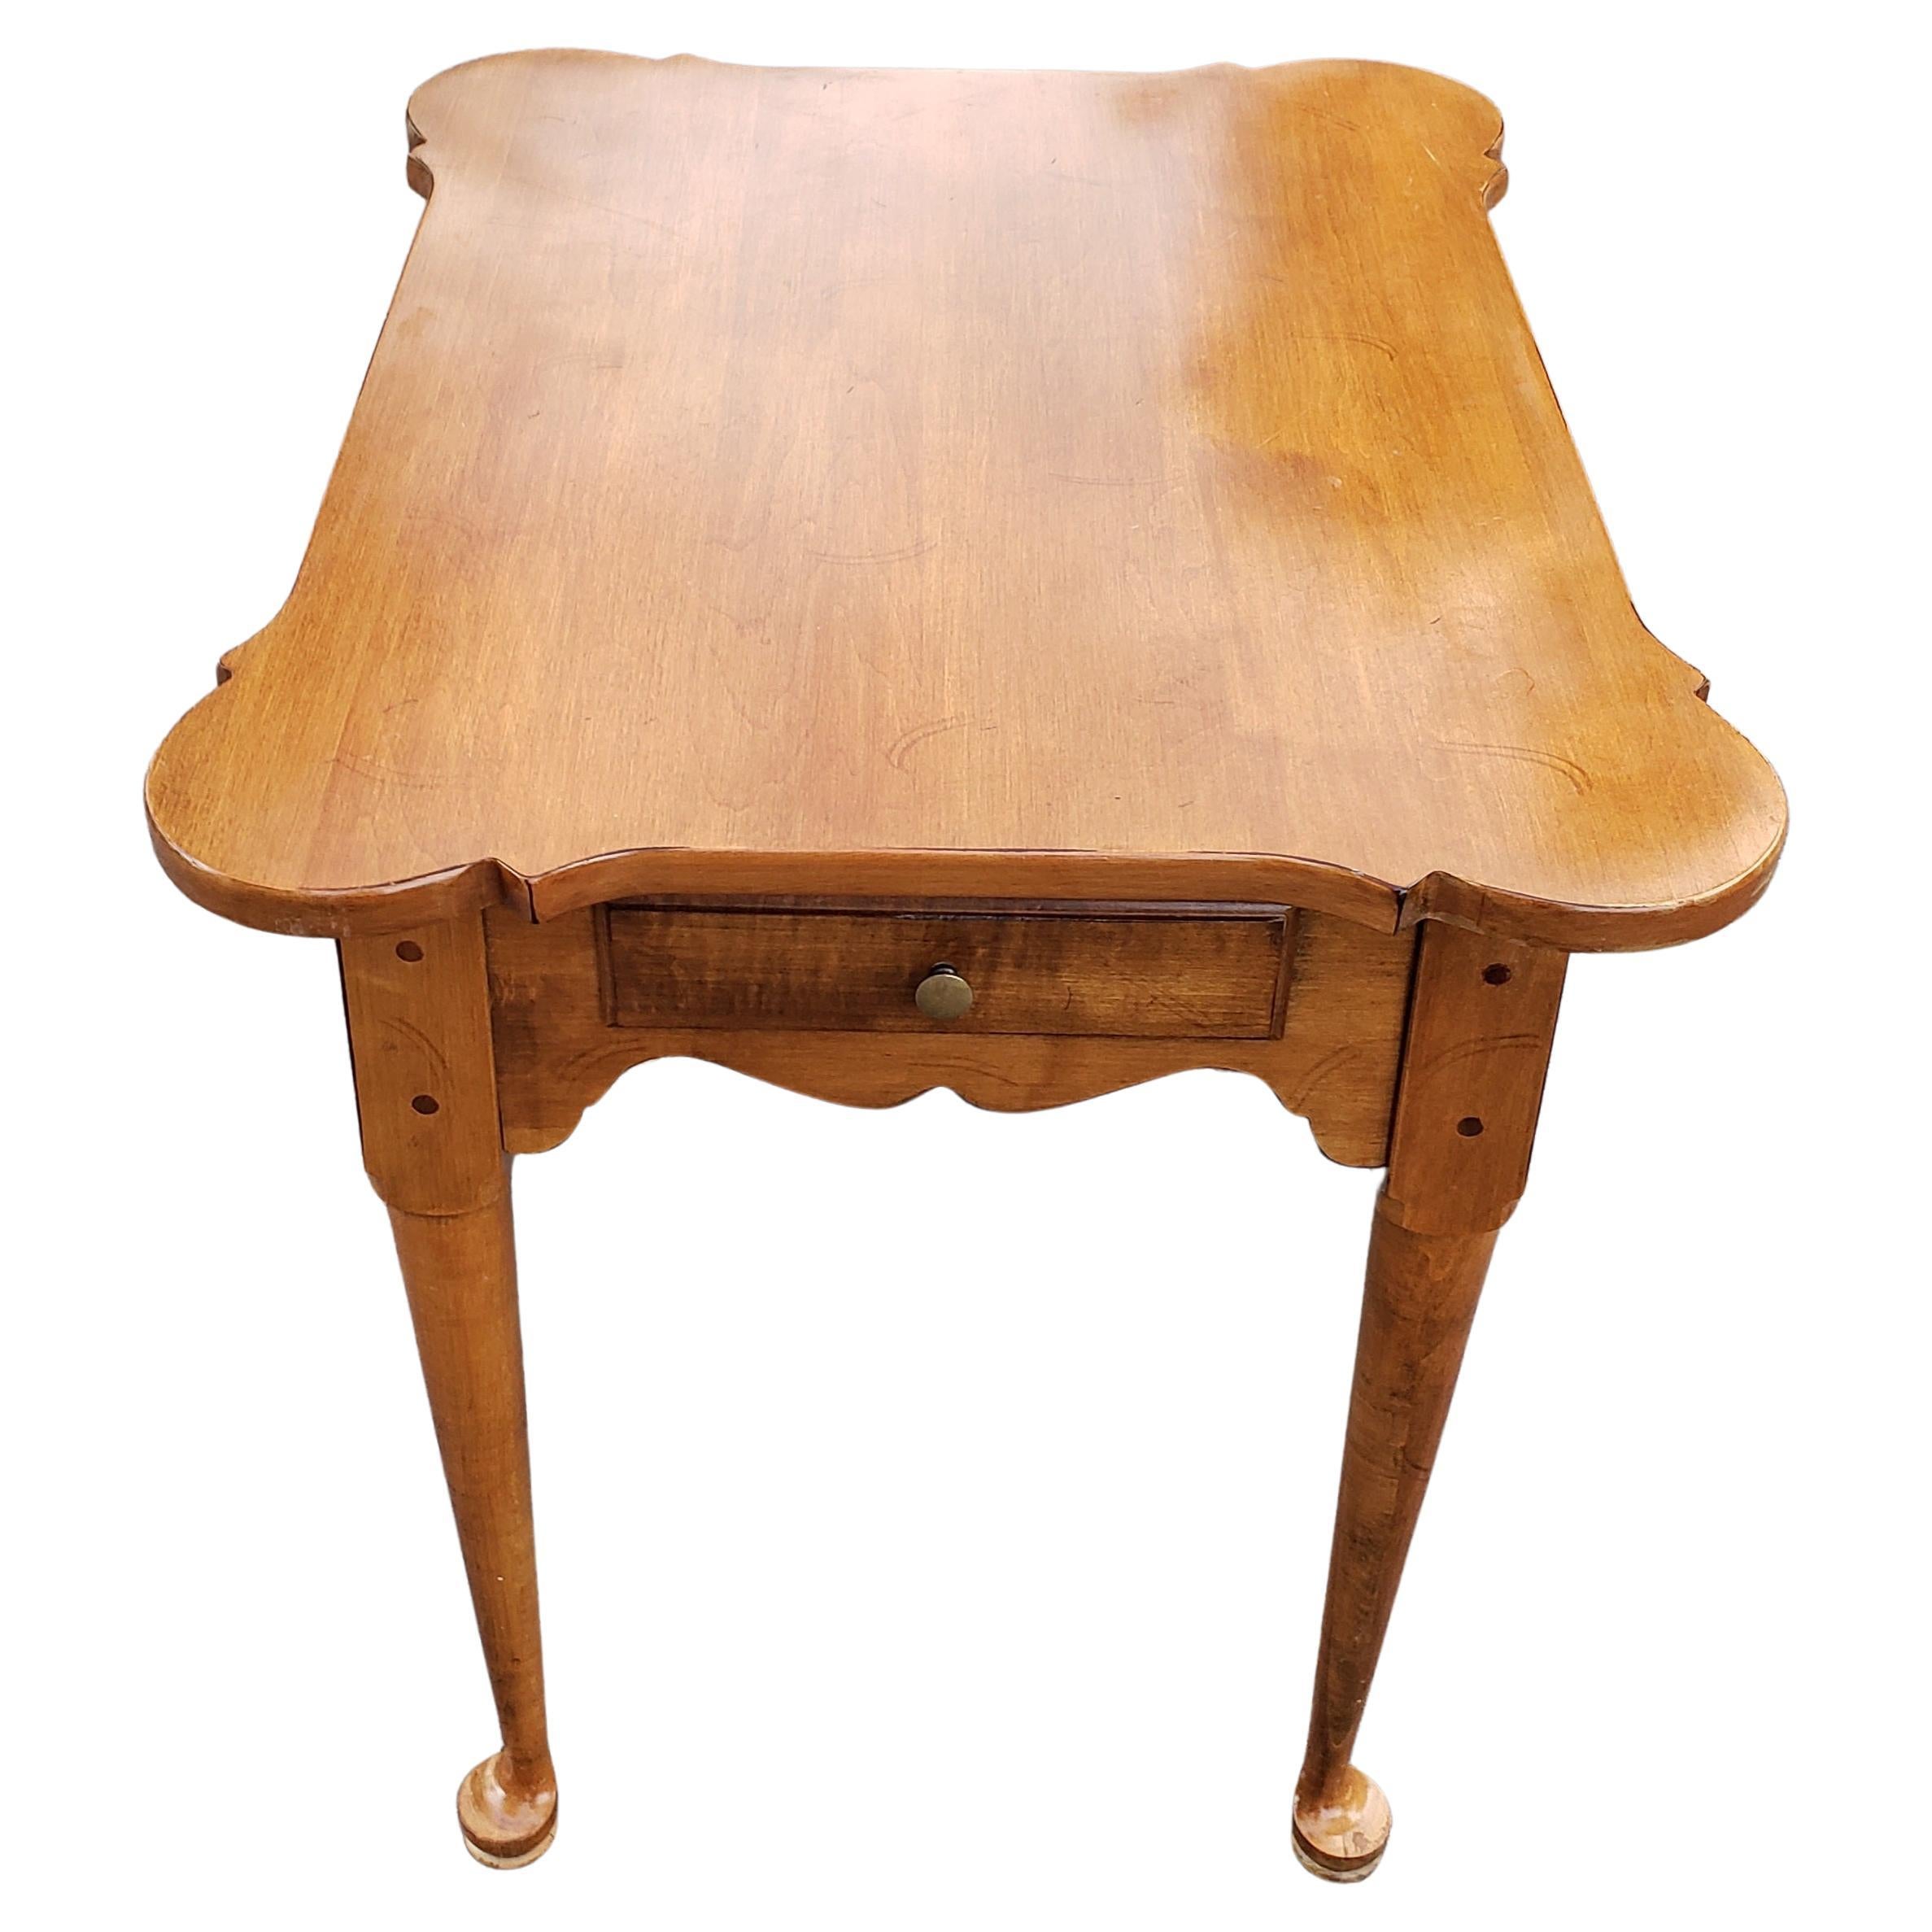 A skillfully crafted Mid-Century American Classical Maple Single Drawer Side Table in great vintage condition. Measures 21